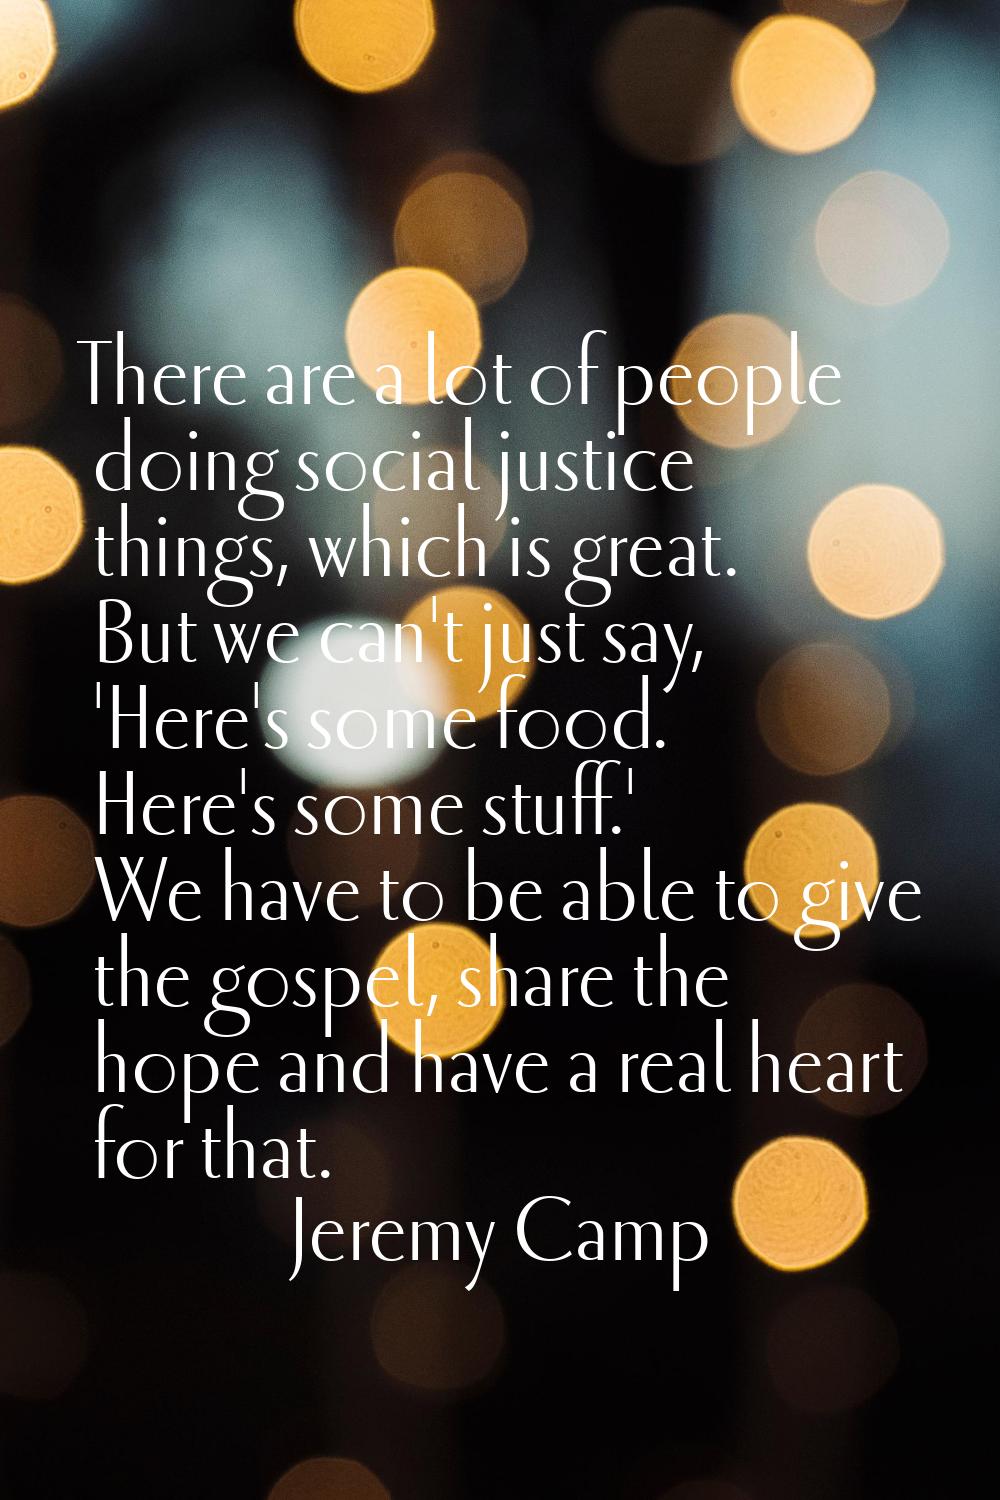 There are a lot of people doing social justice things, which is great. But we can't just say, 'Here